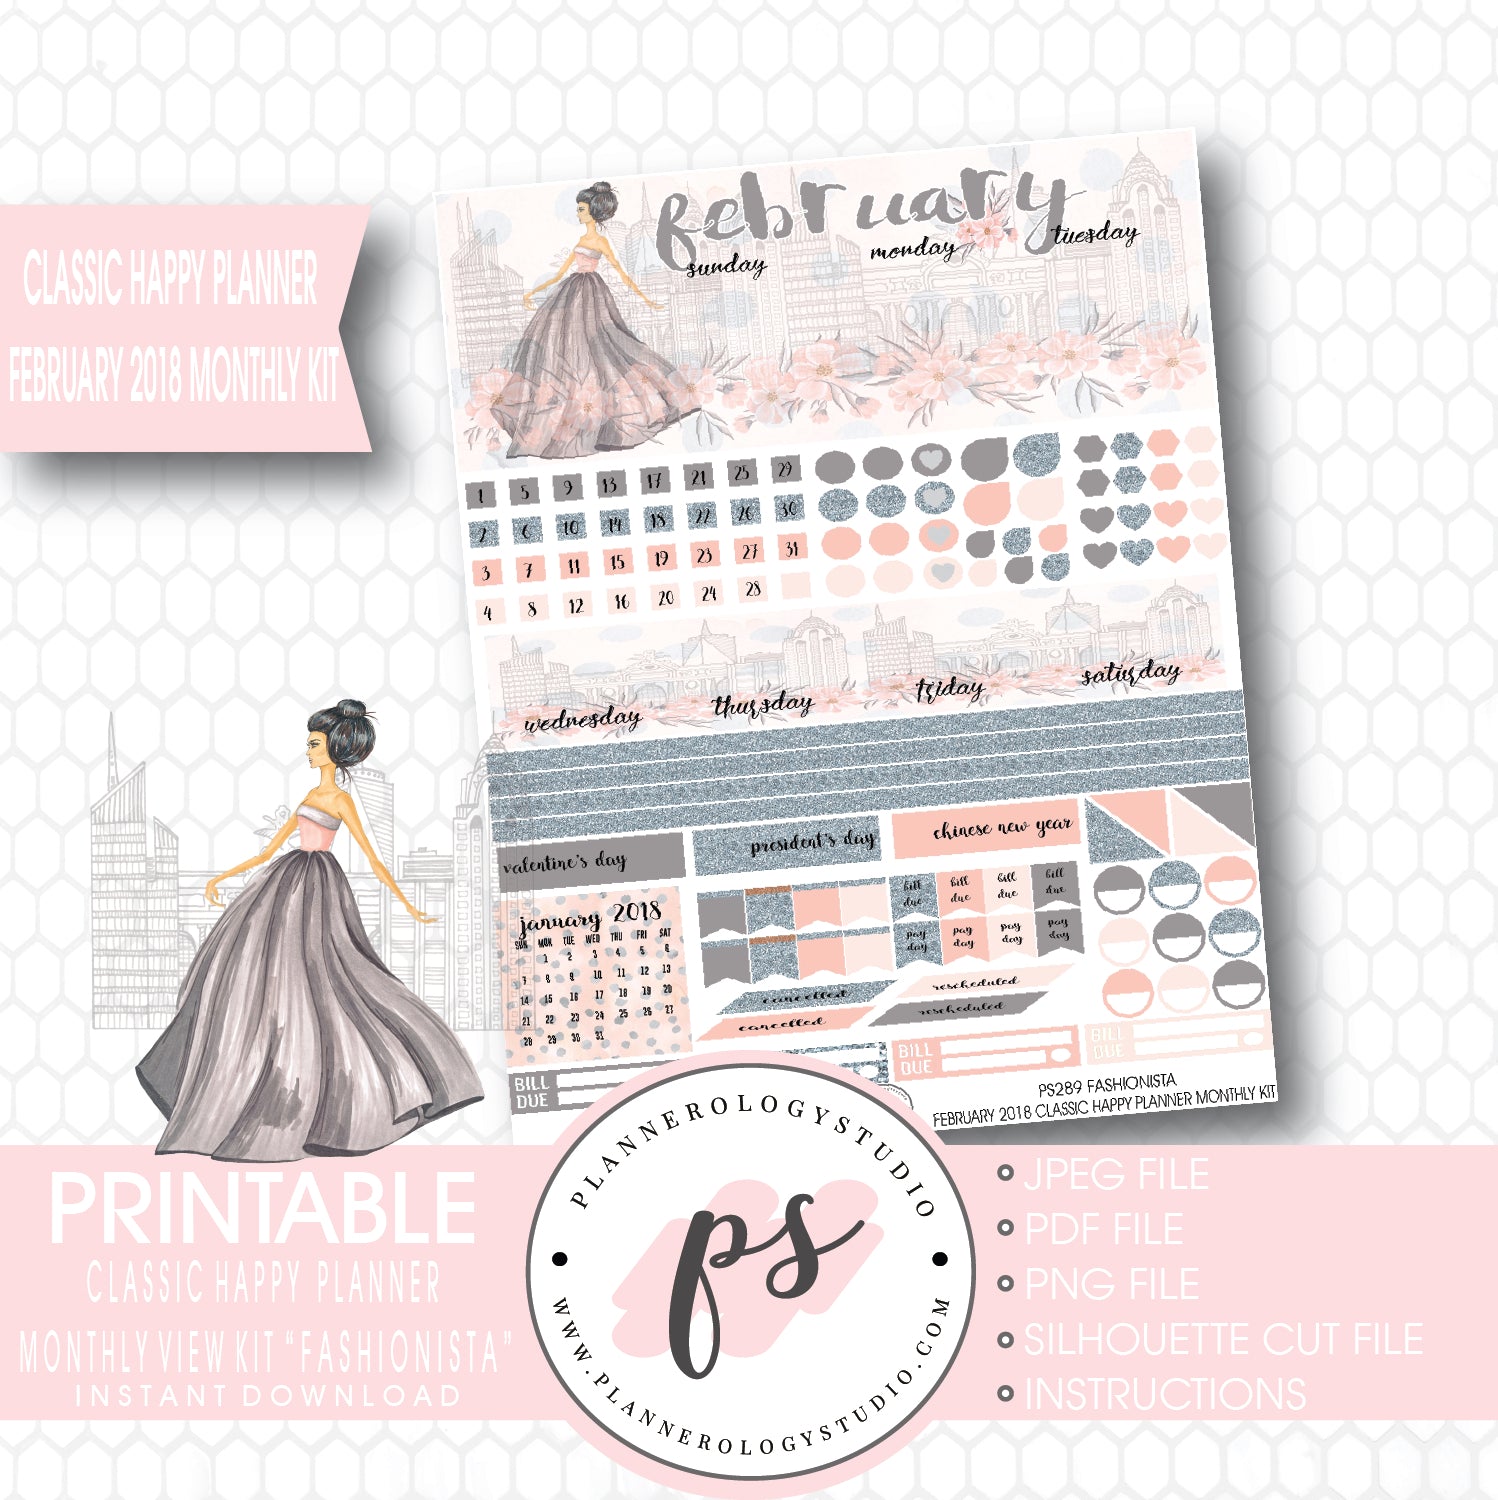 Fashionista February 2018 Monthly View Kit Digital Printable Planner Stickers (for use with Classic Happy Planner) - Plannerologystudio